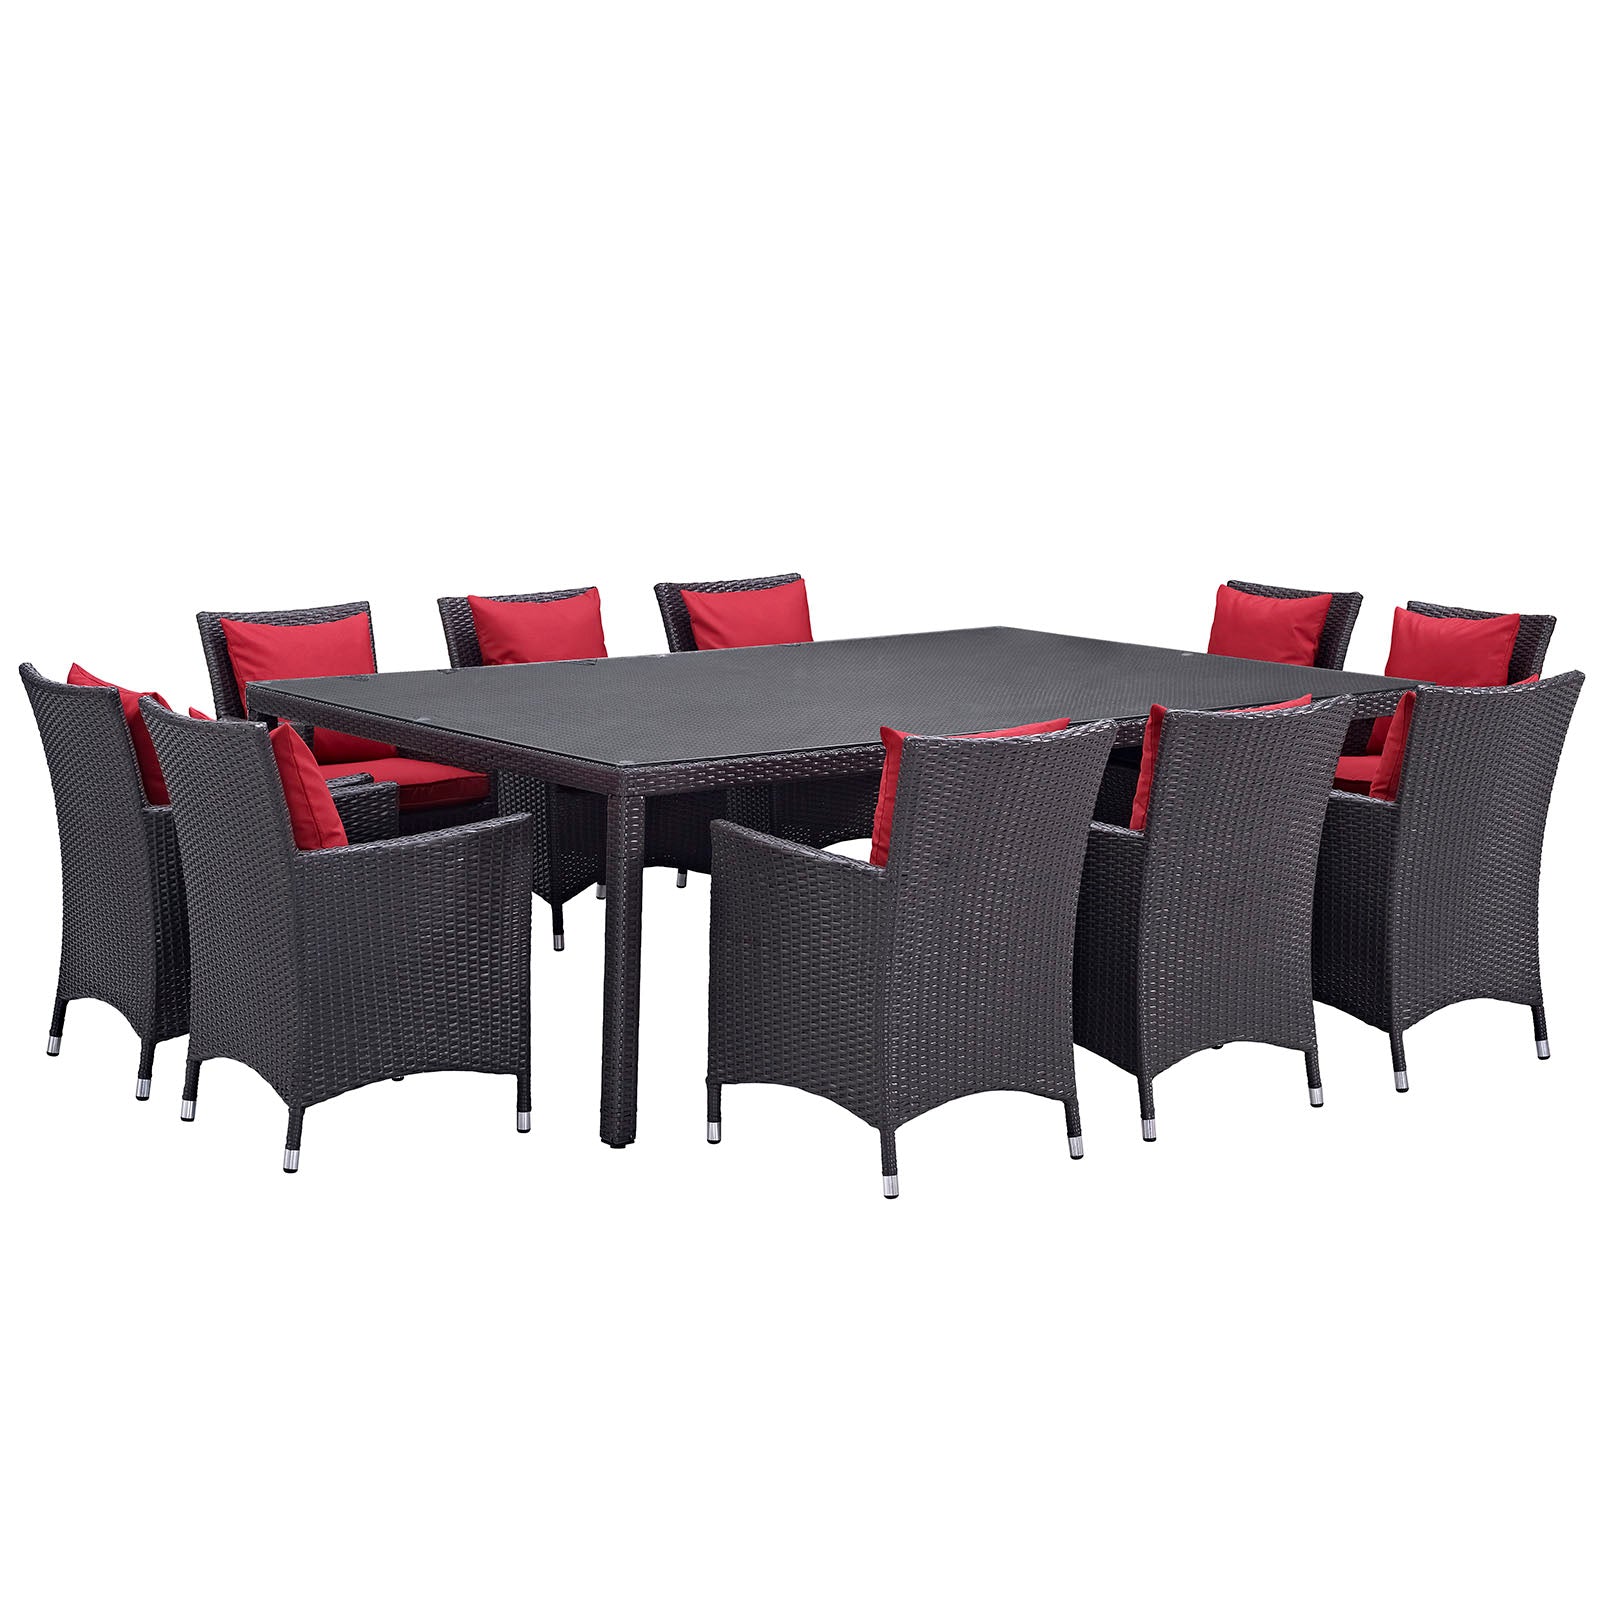 Modway Outdoor Dining Sets - Convene 11 Piece Outdoor Patio Dining Set Espresso Red